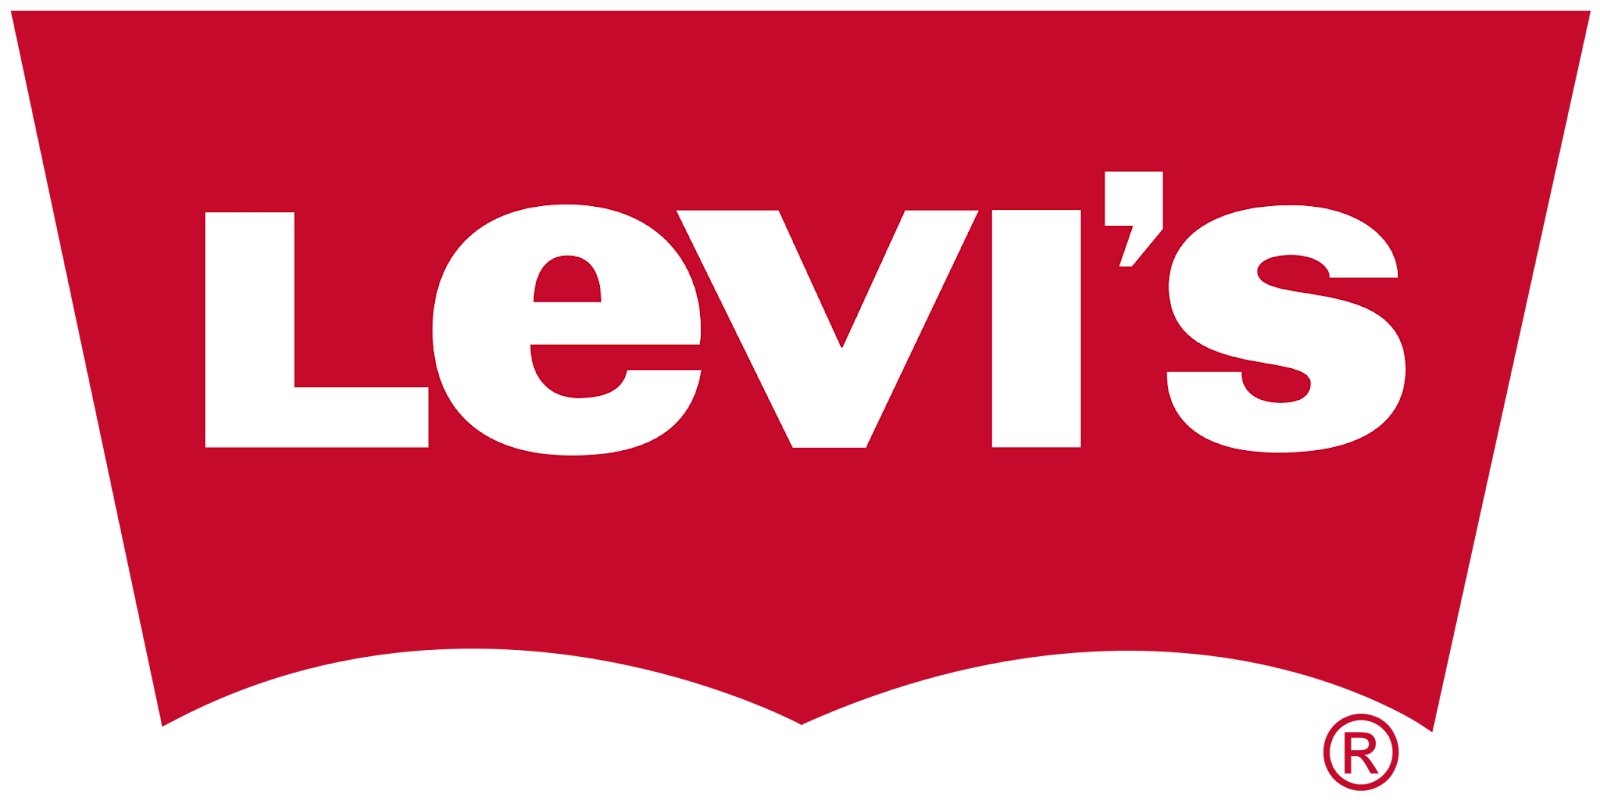 Check out these brilliant marketing strategies of Levis Strauss & Co